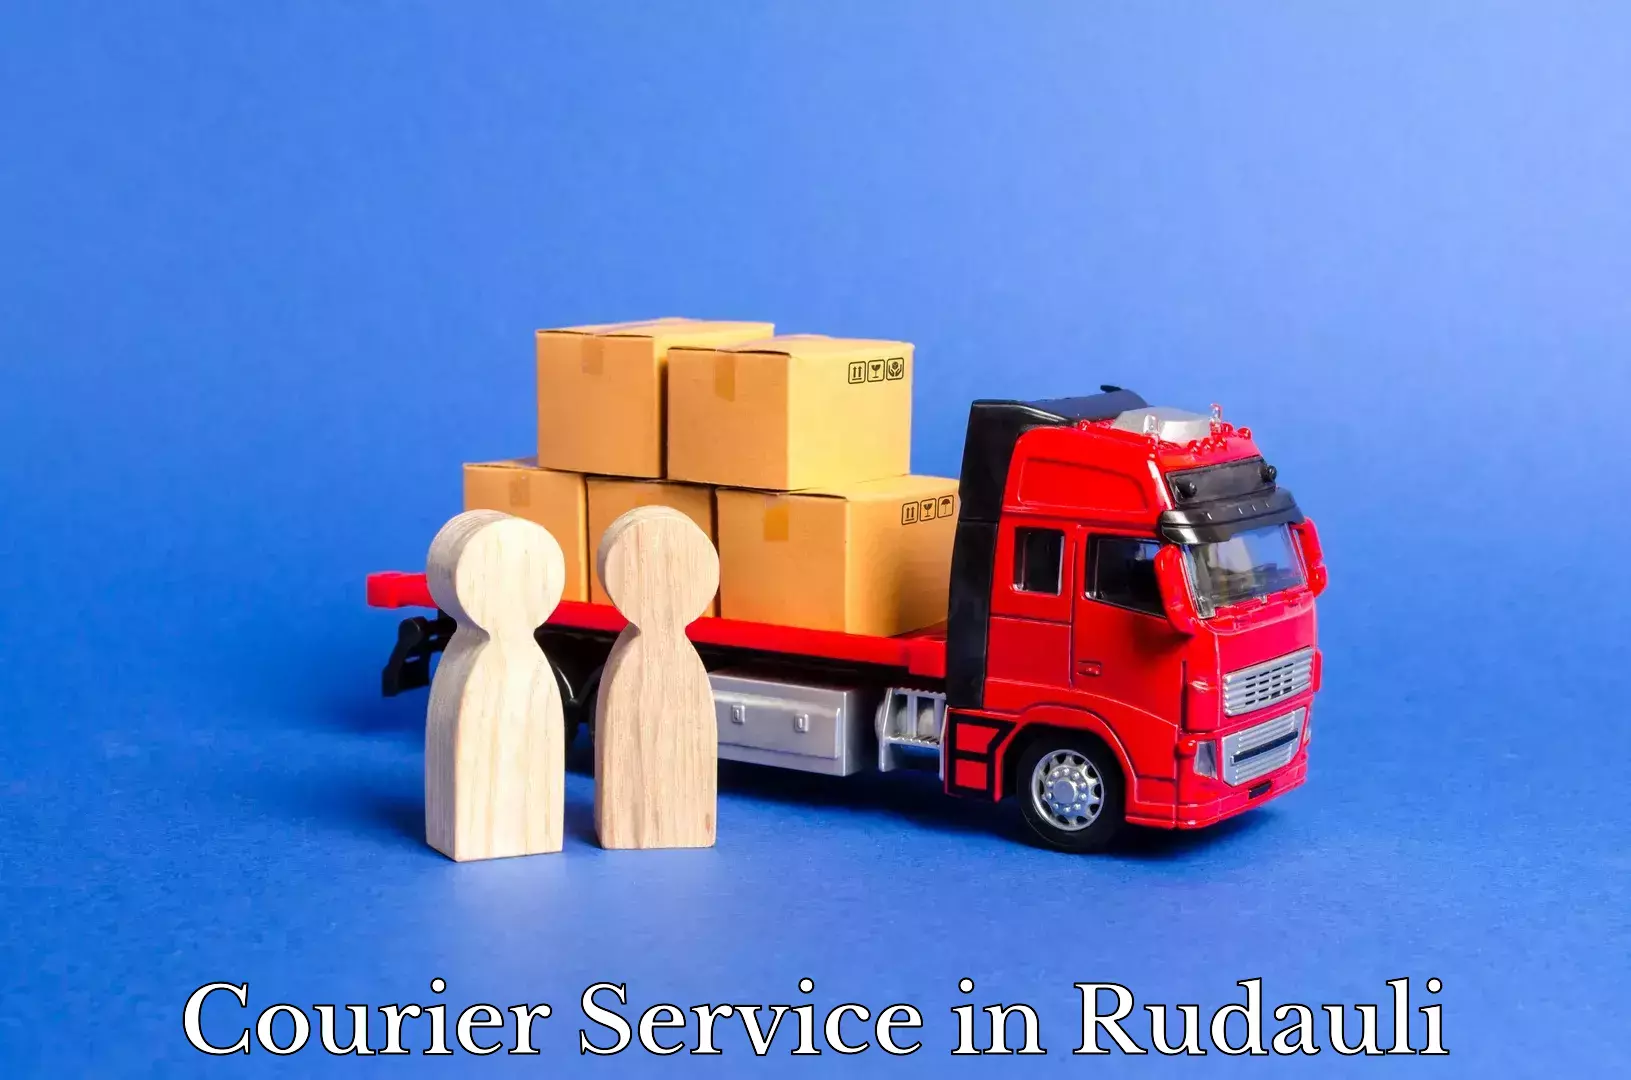 Rapid shipping services in Rudauli